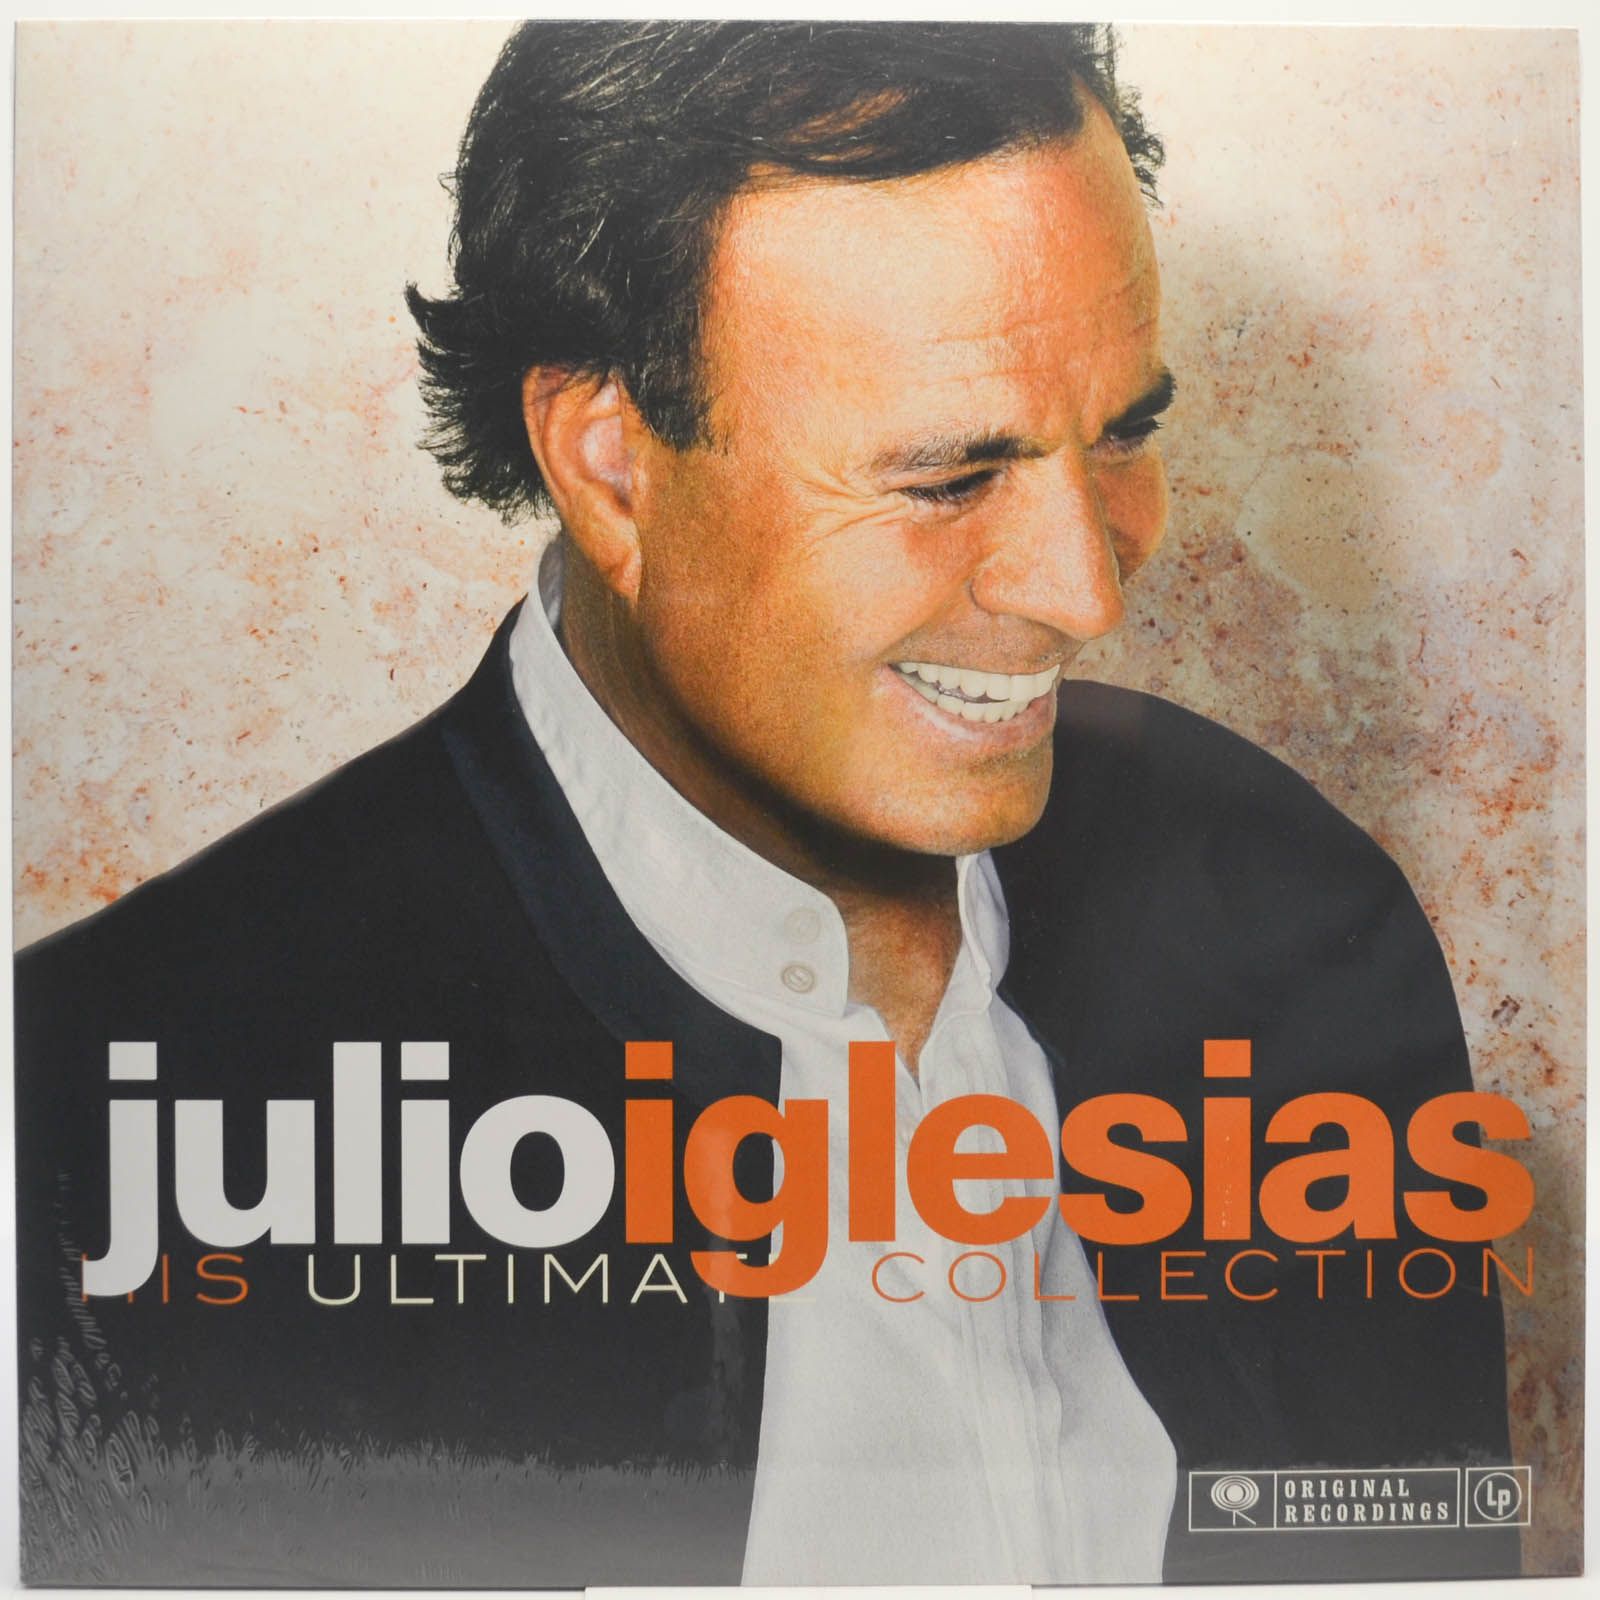 Julio Iglesias — His Ultimate Collection, 2018